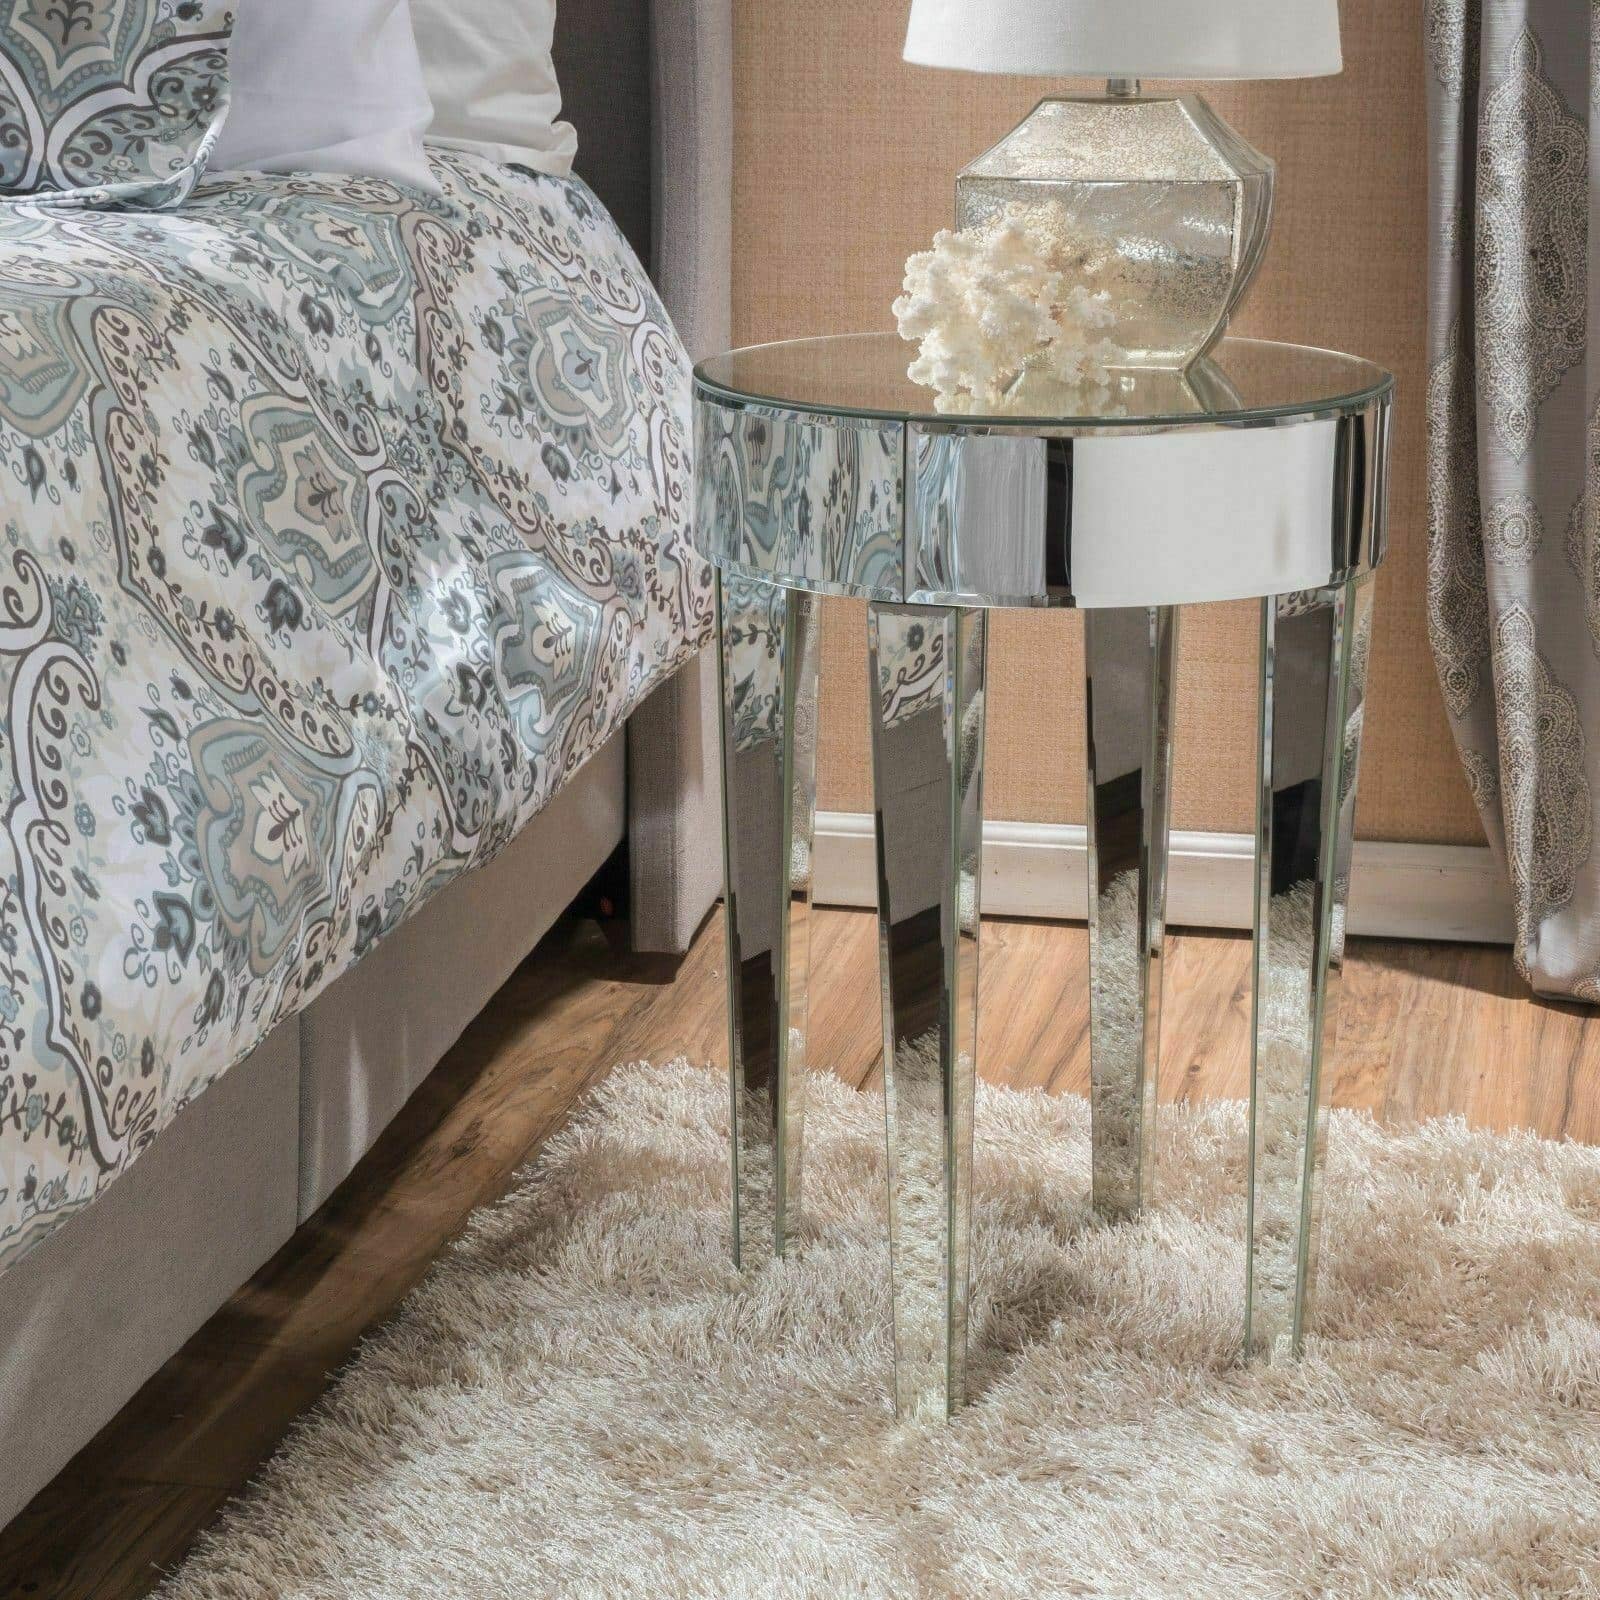 A modern bedroom featuring an Alvo Modern Glam Round Mirrored Side Table with Tapered Legs, a glass lamp, next to a bed with paisley-patterned bedding and set on a plush white rug.